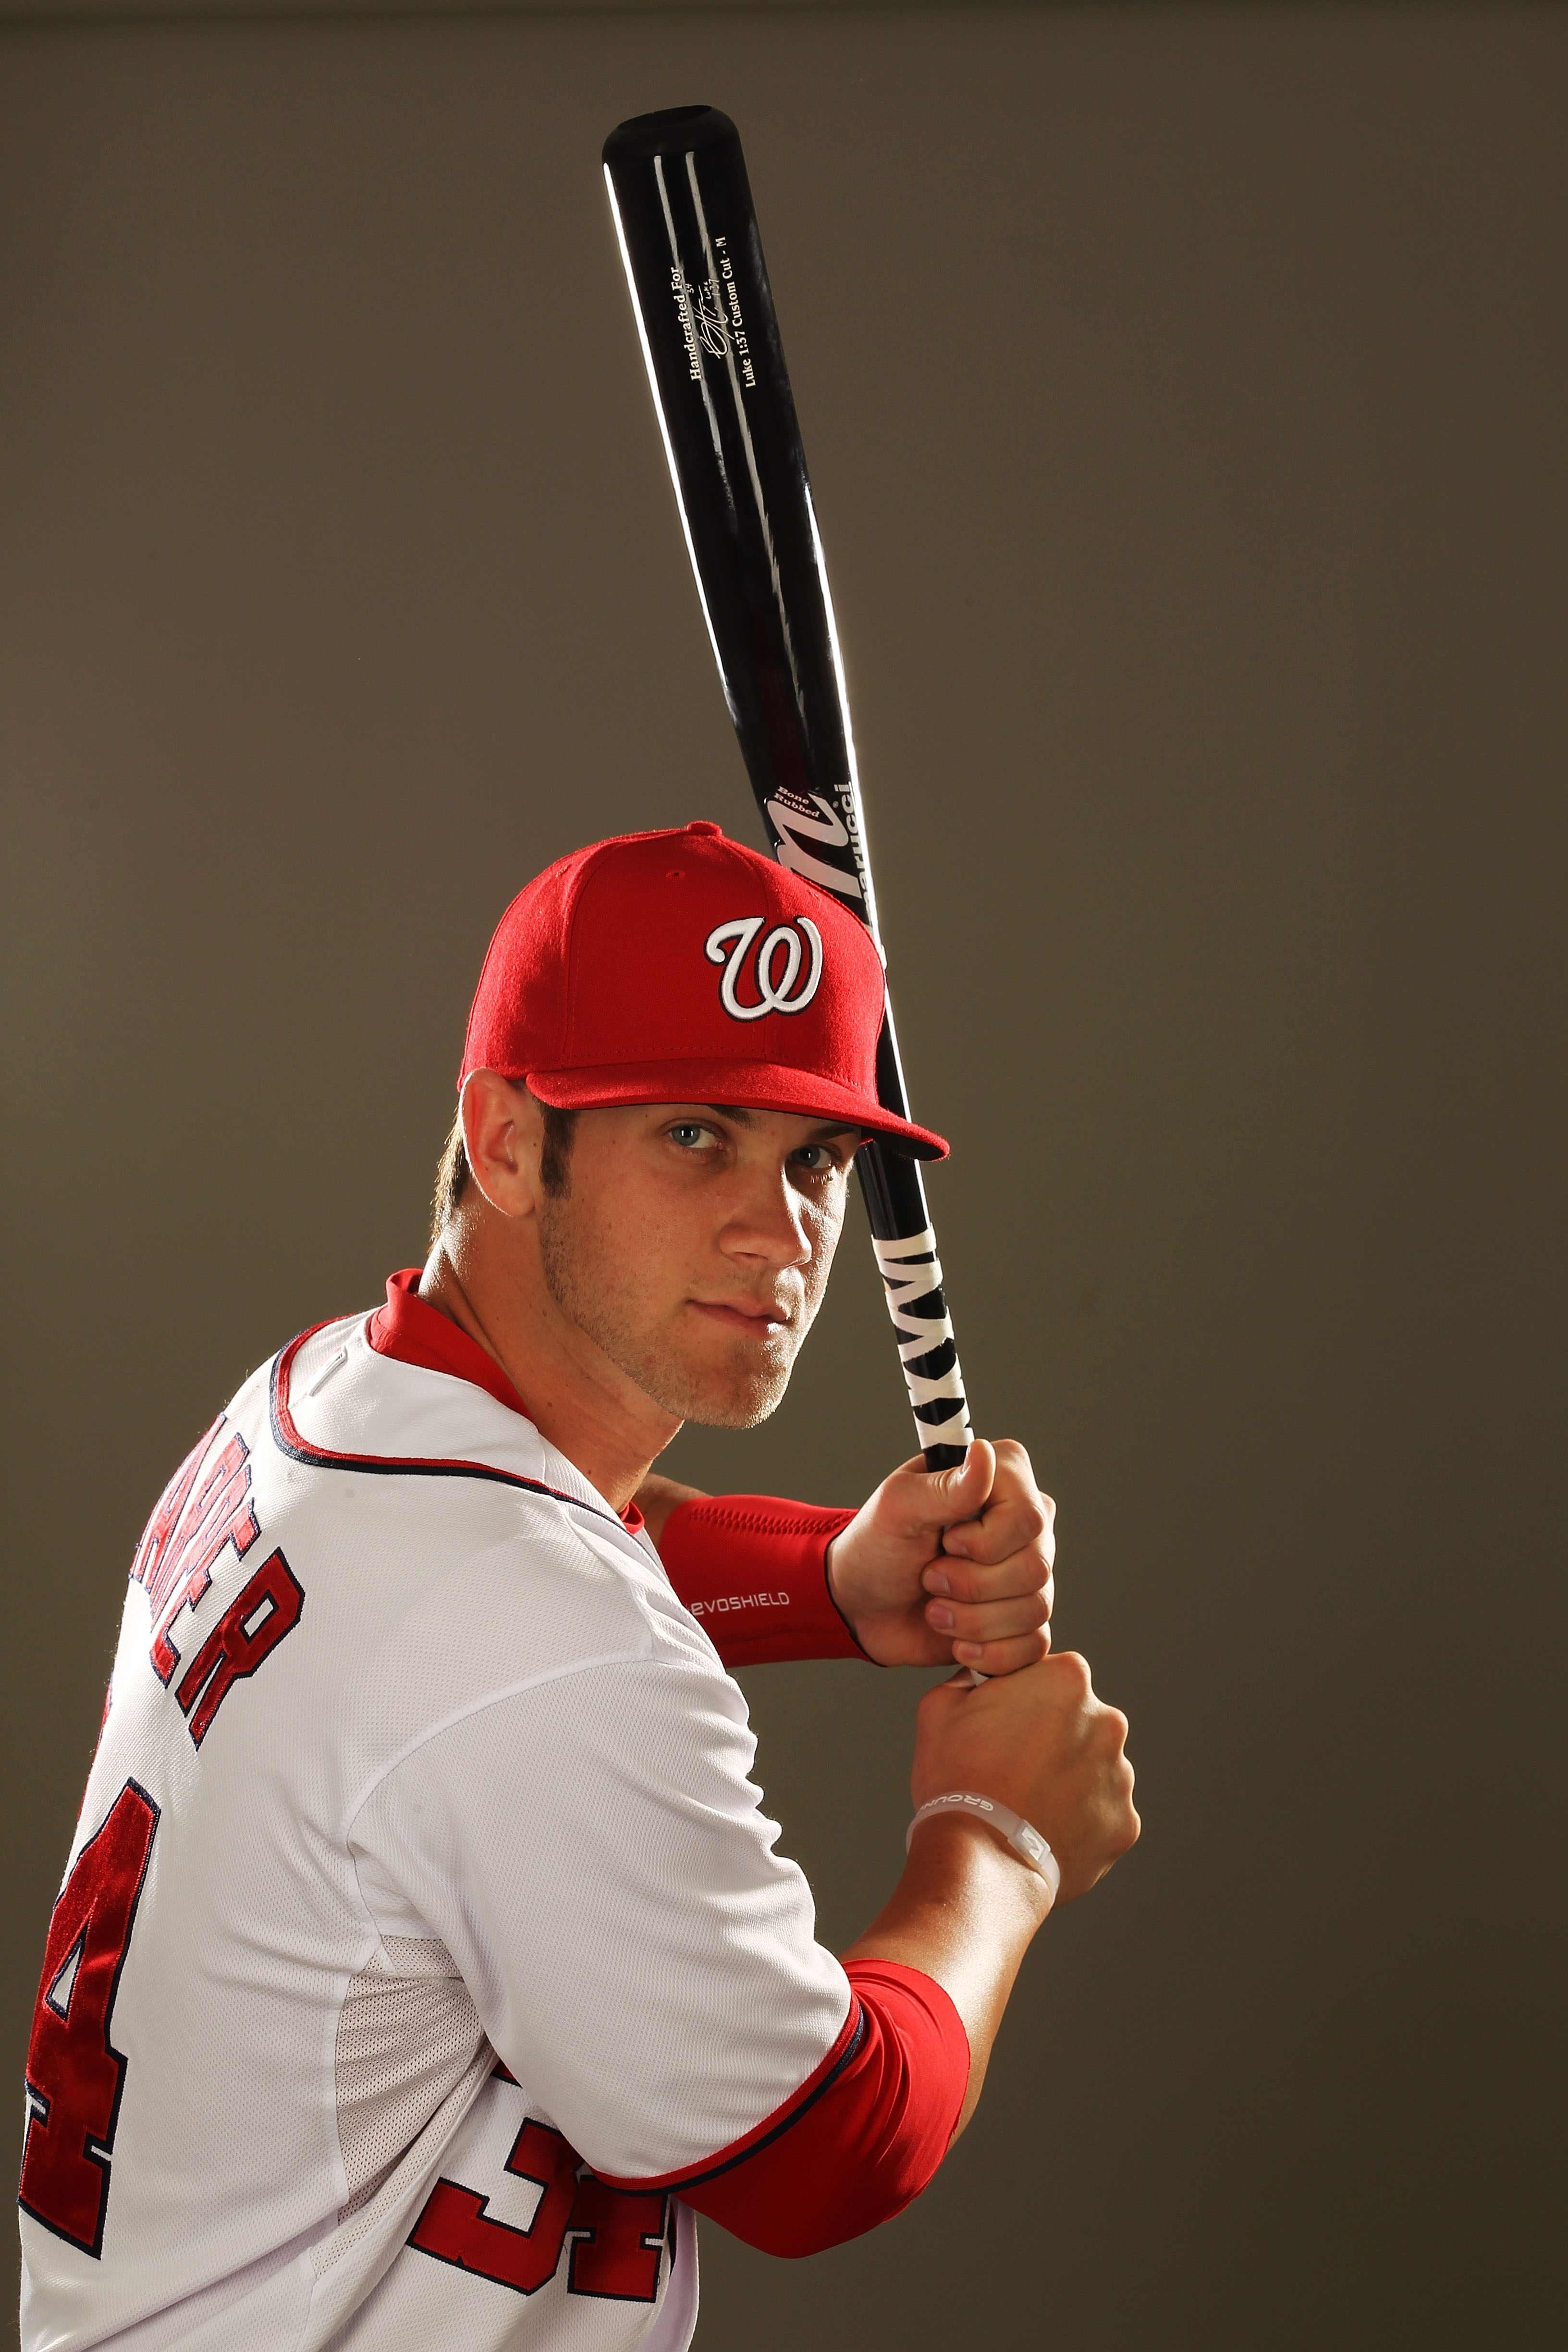 21 SEP 2010: 2010 MLB Draft's first overall pick Bryce Harper of the  Nationals works out with his fellow Instructional League team mates at the  Washington Nationals Baseball Complex in Viera, Florida. (